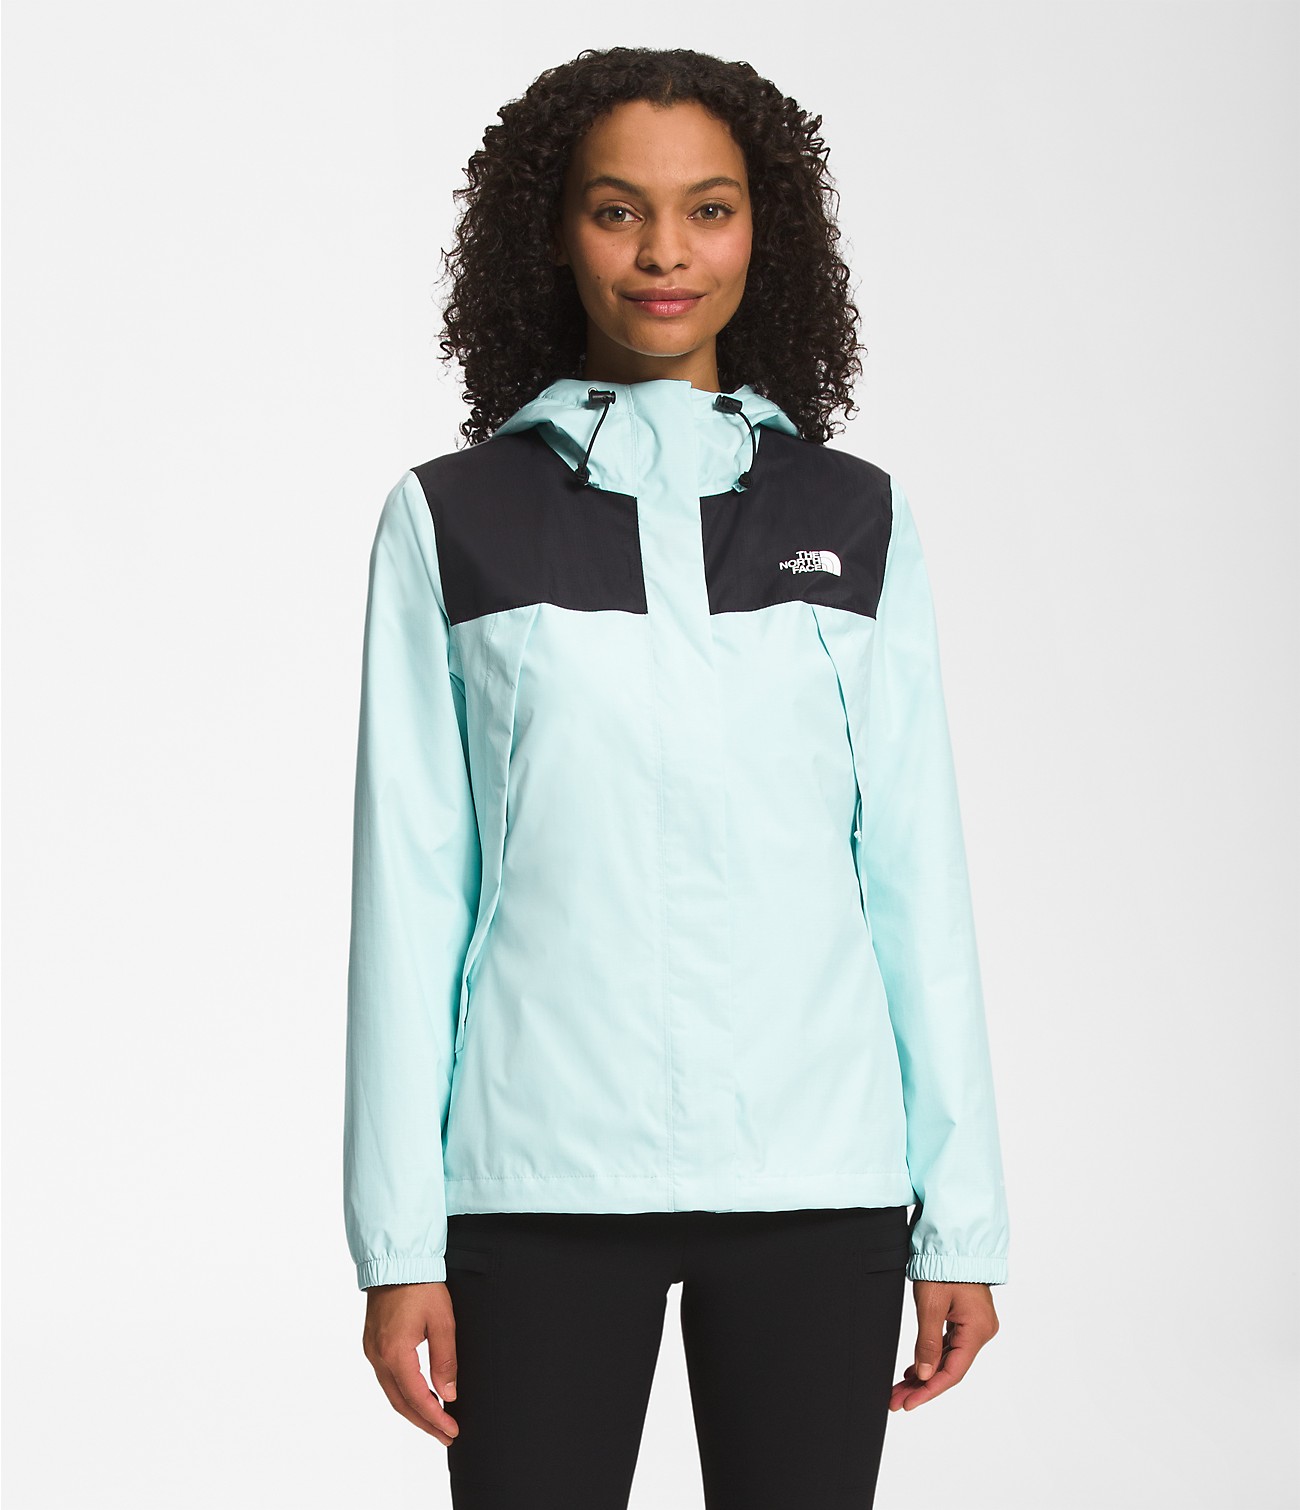 Unlock Wilderness' choice in the Craghoppers Vs North Face comparison, the Antora Jacket by The North Face